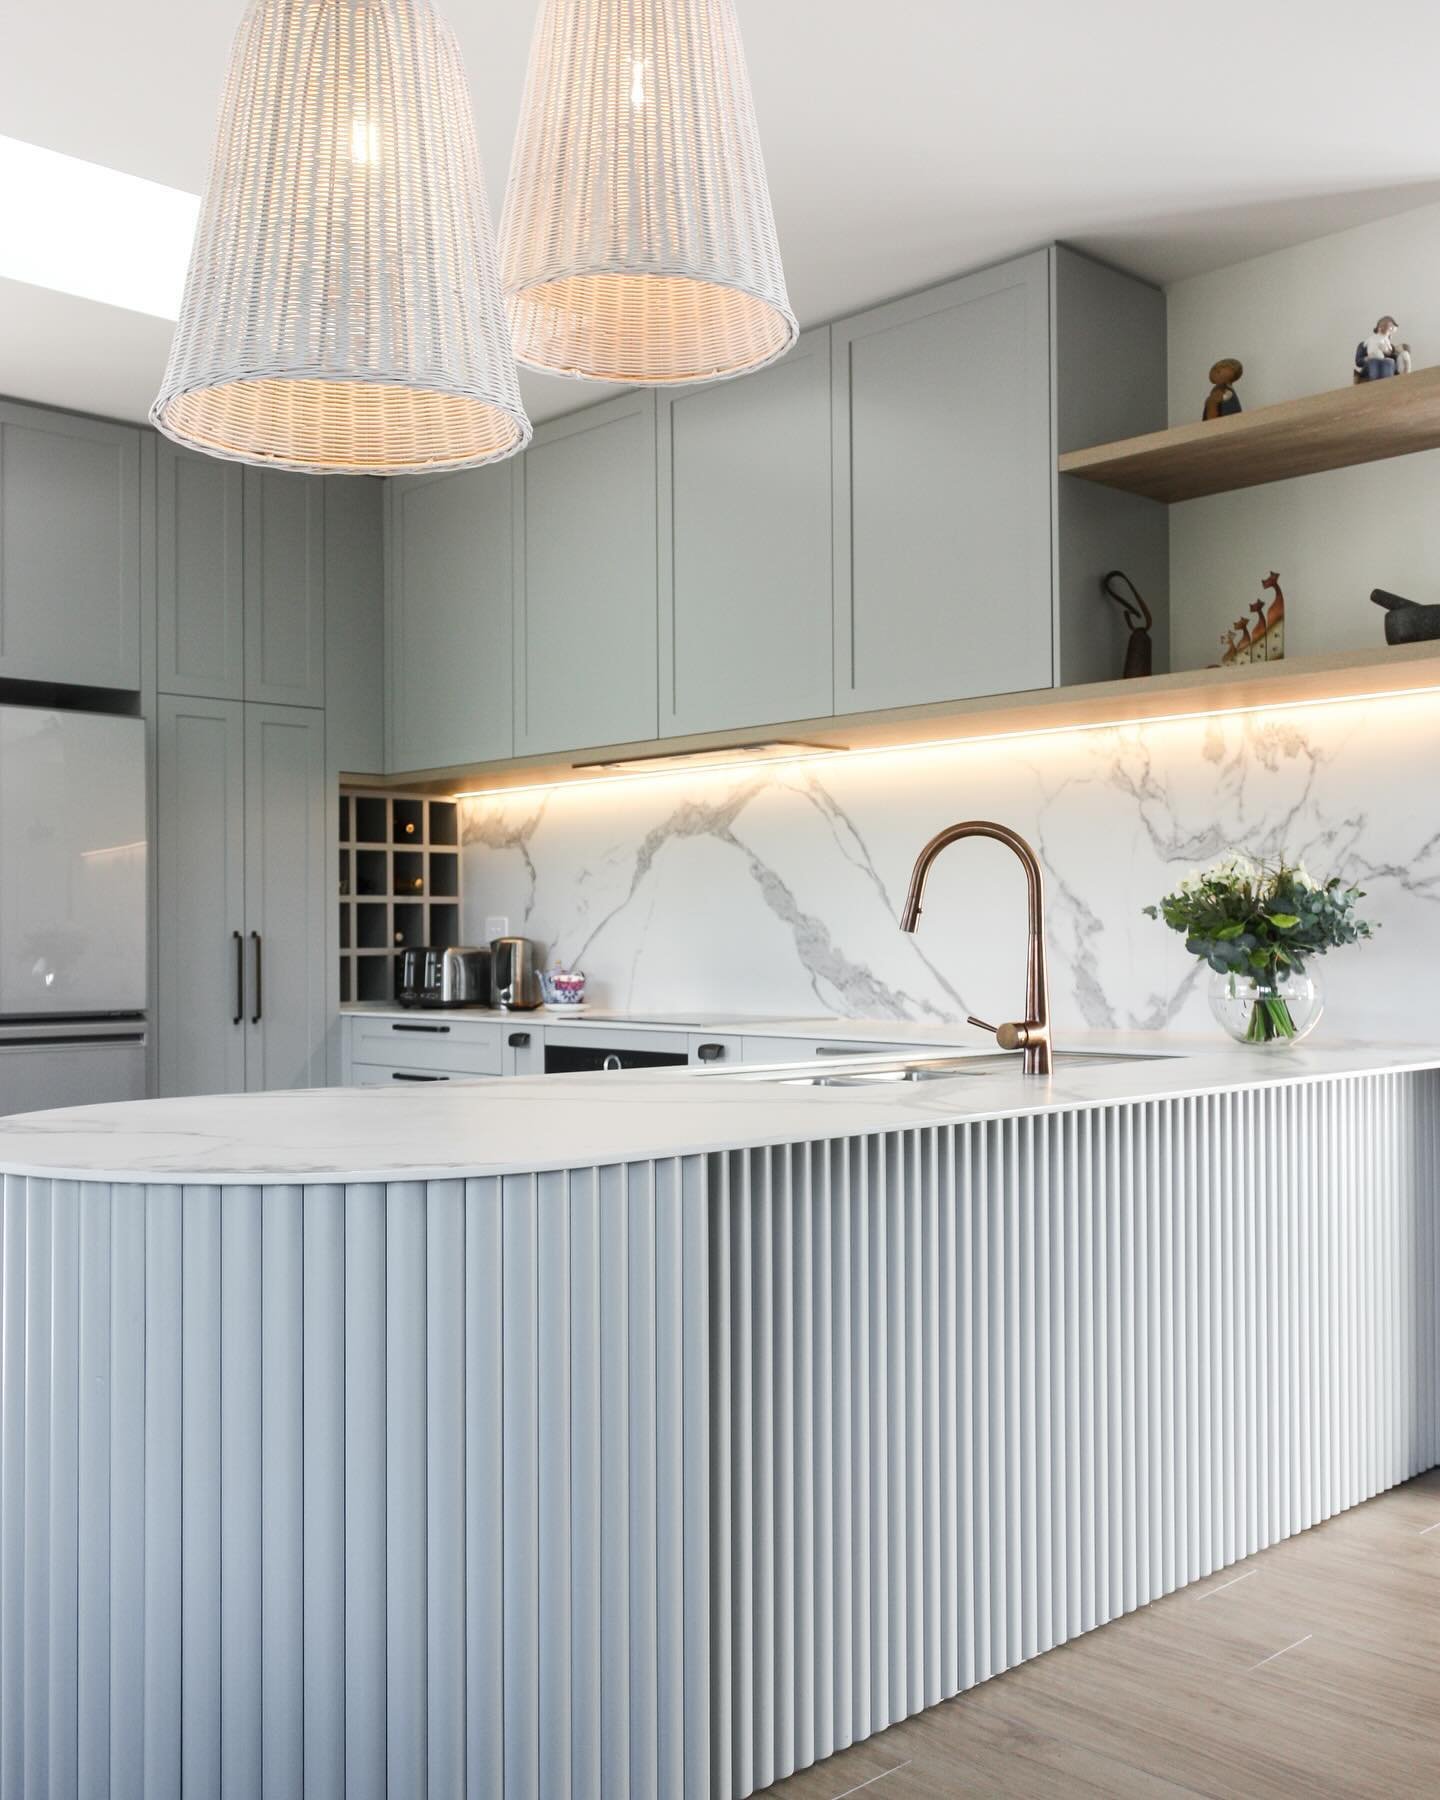 Take a look at our latest project up at Kennedy&rsquo;s Bush ✨ Designed and manufactured by the RKJ team
&nbsp;
We worked closely with the clients and their interior designer to create this beautiful, family kitchen and we are so happy with how it ha